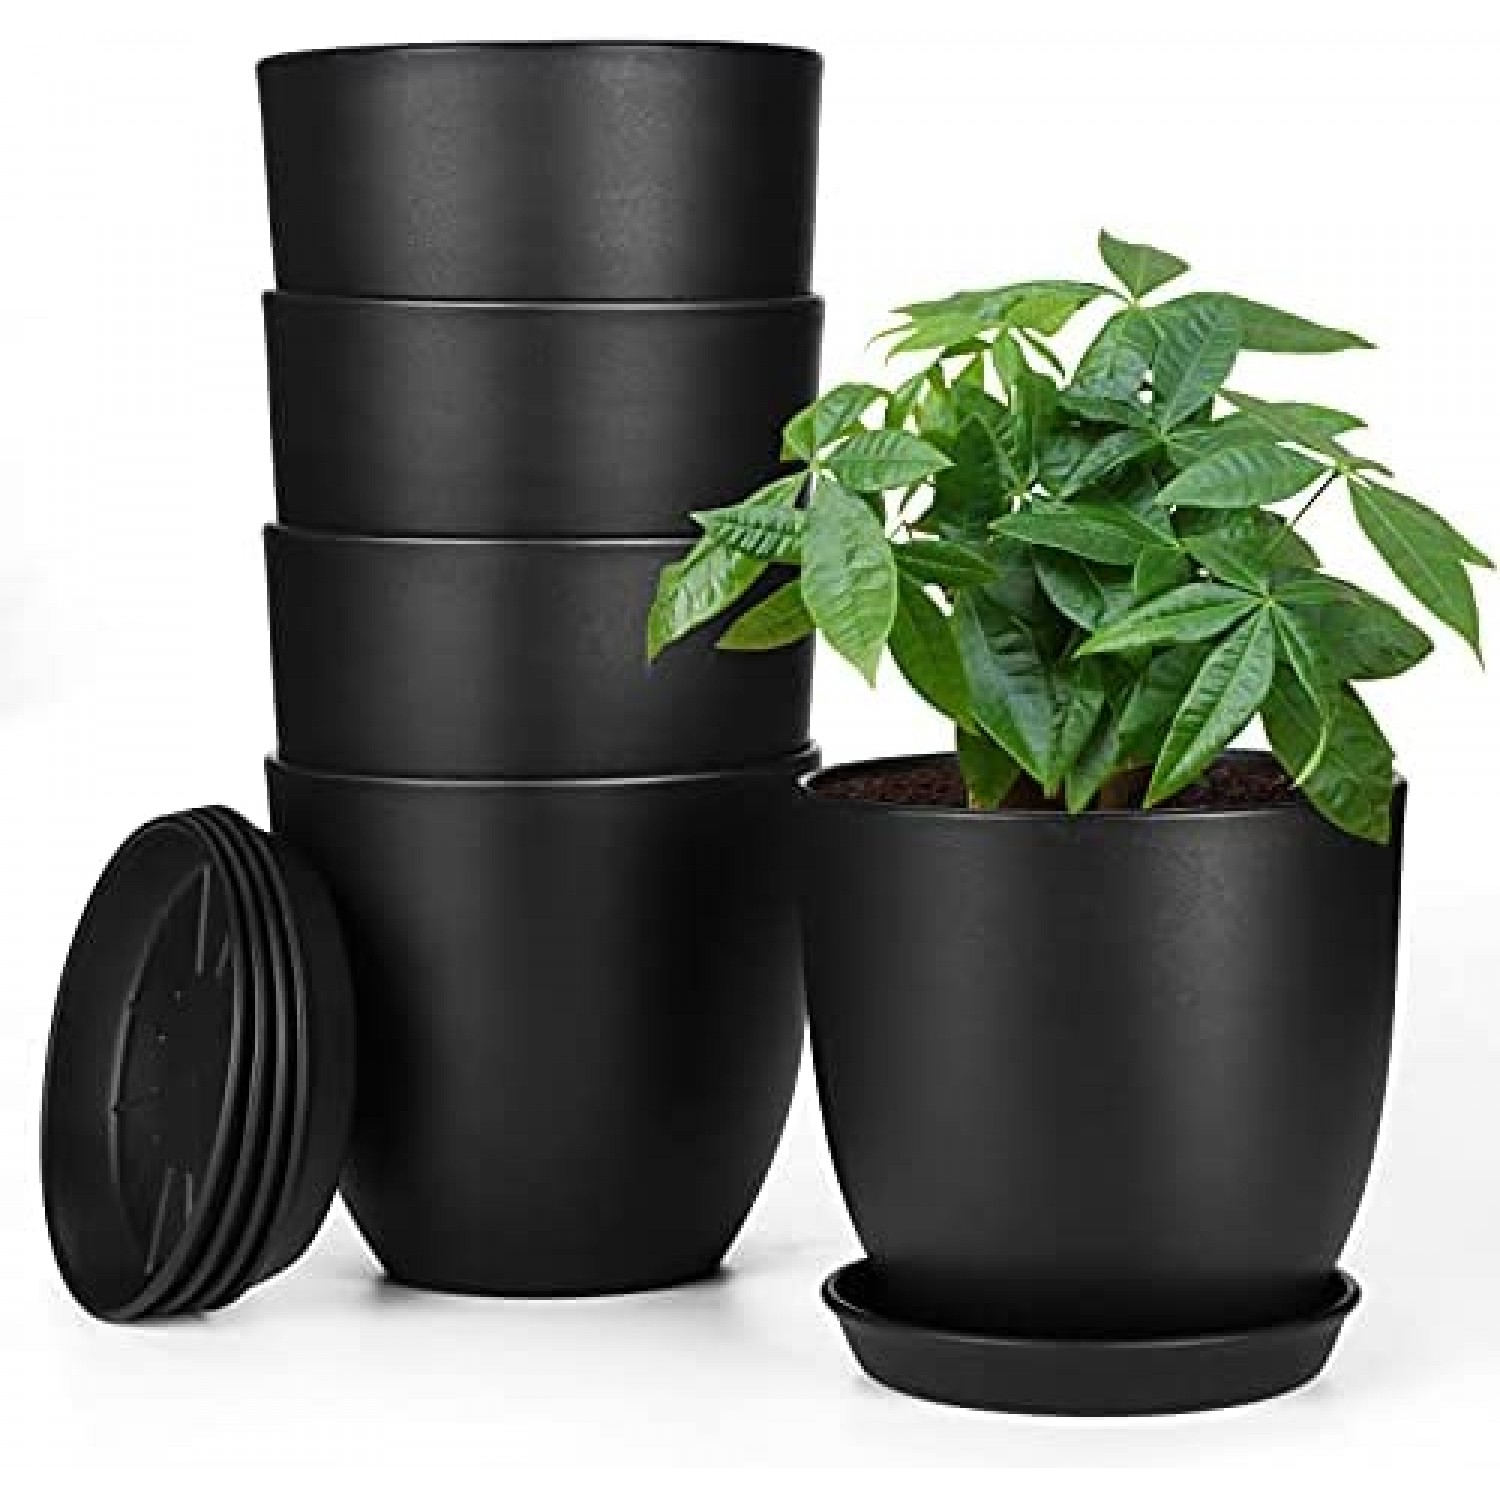 Plant Pots with Drainage Holes, Greaner 6inch Round Plastic